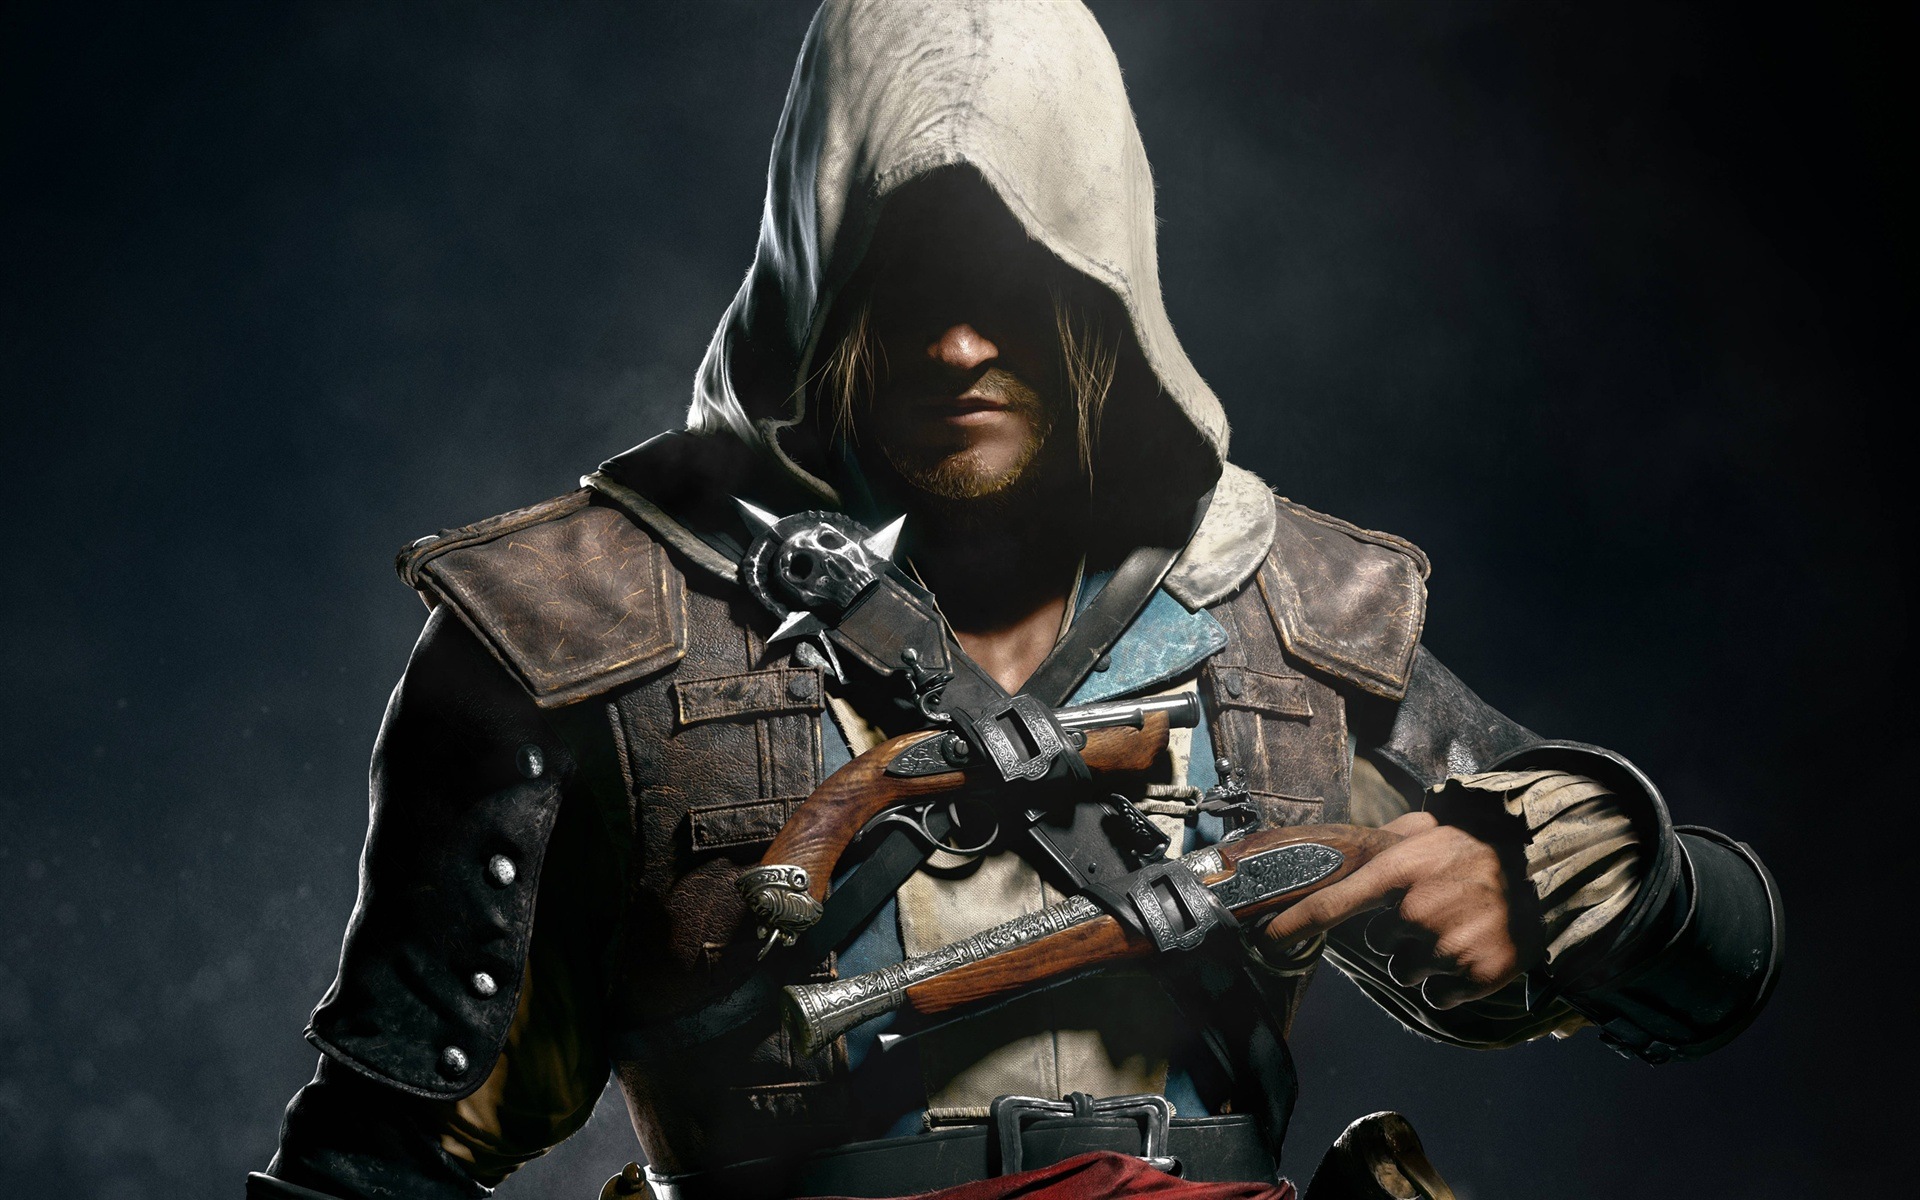 Creed IV Assassin: Black Flag HD wallpapers #13 - 1920x1200